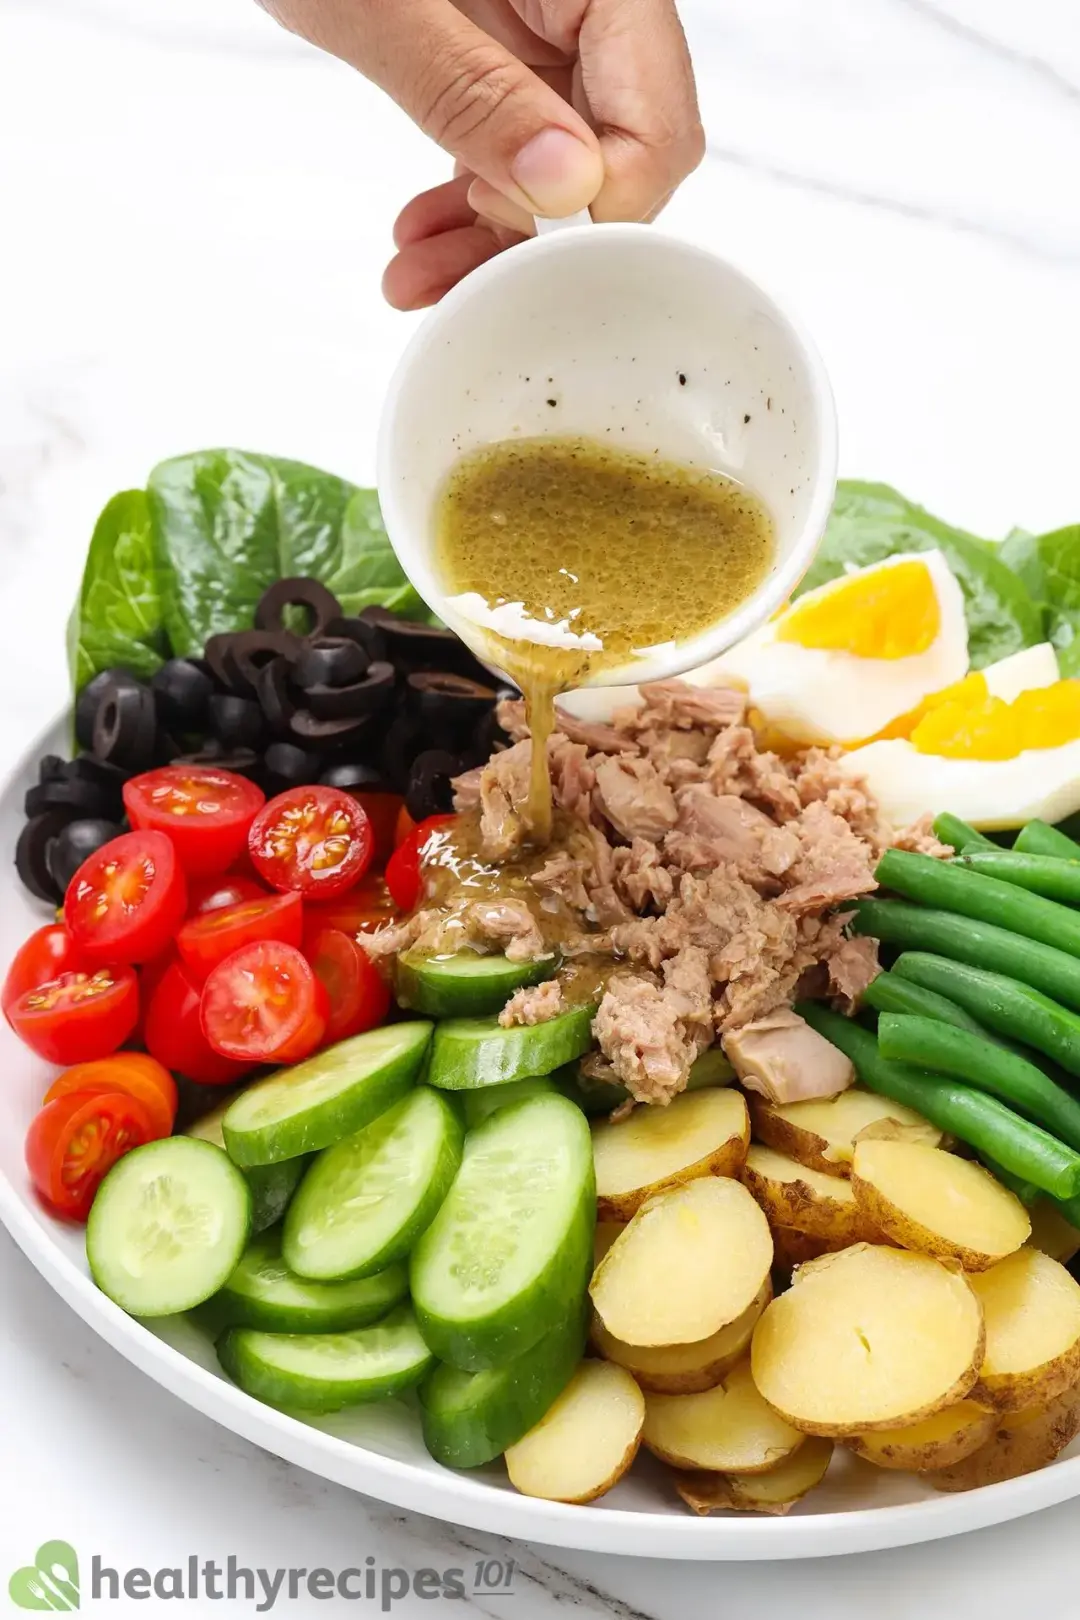 Nicoise salad with boiled eggs, green beans, cherry tomatoes, olives, and tuna on a bed of lettuce.